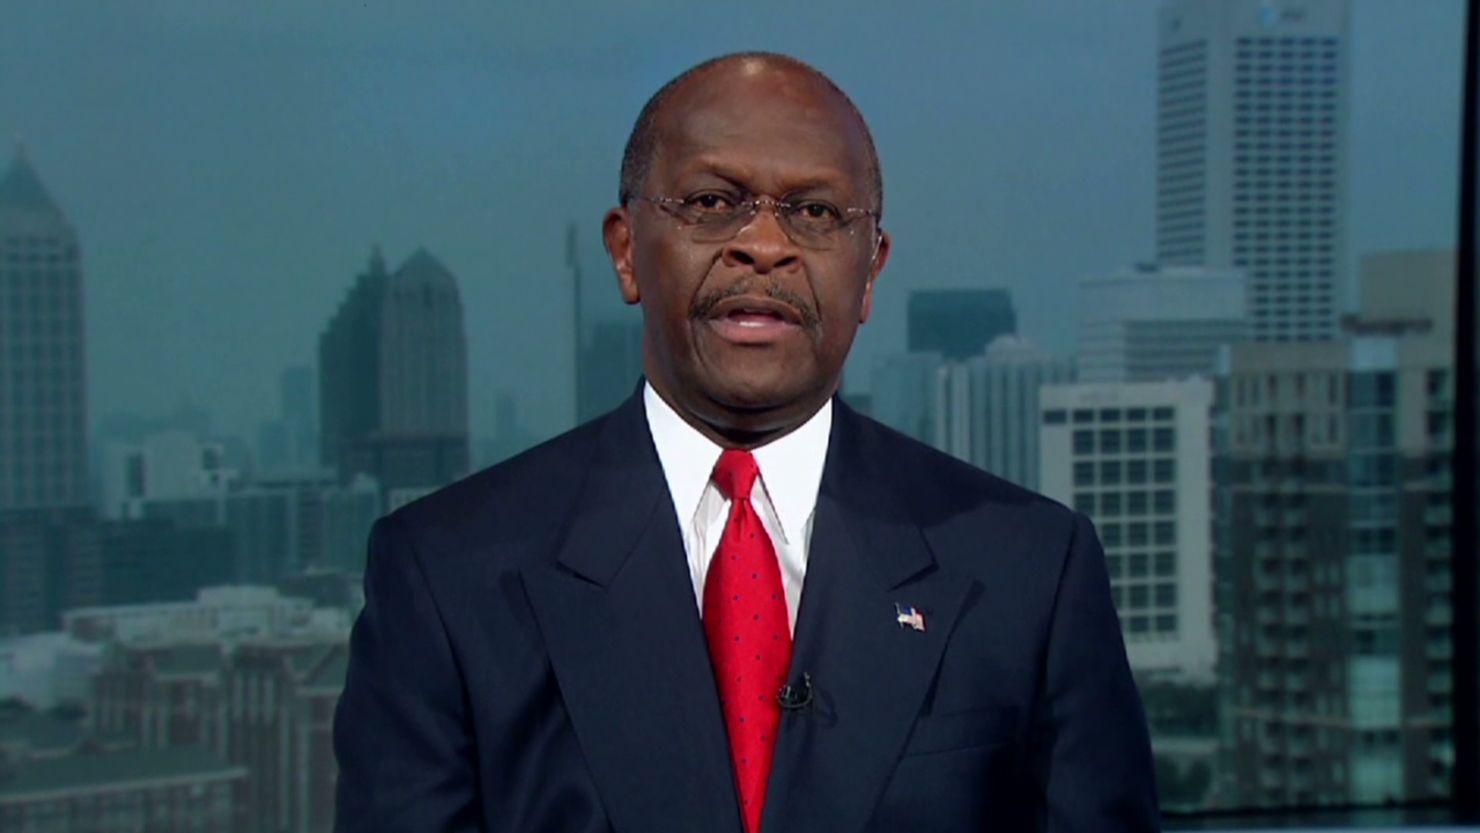 Herman Cain said, "Many African-Americans have been brainwashed into not being open-minded."